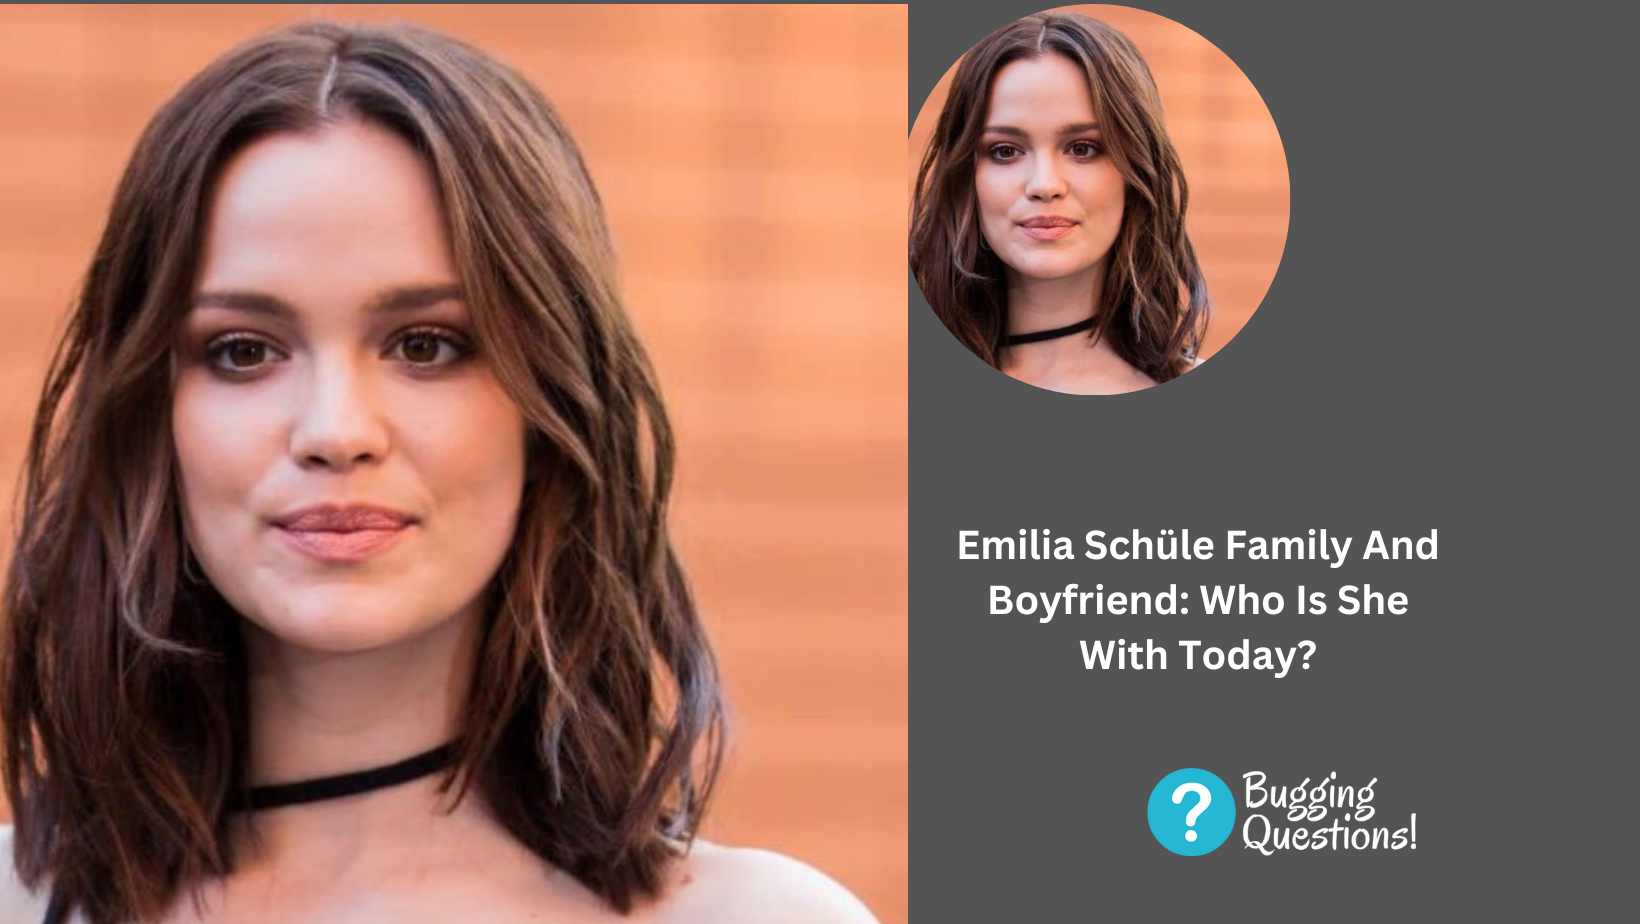 Emilia Schüle Family And Boyfriend: Who Is She With Today?